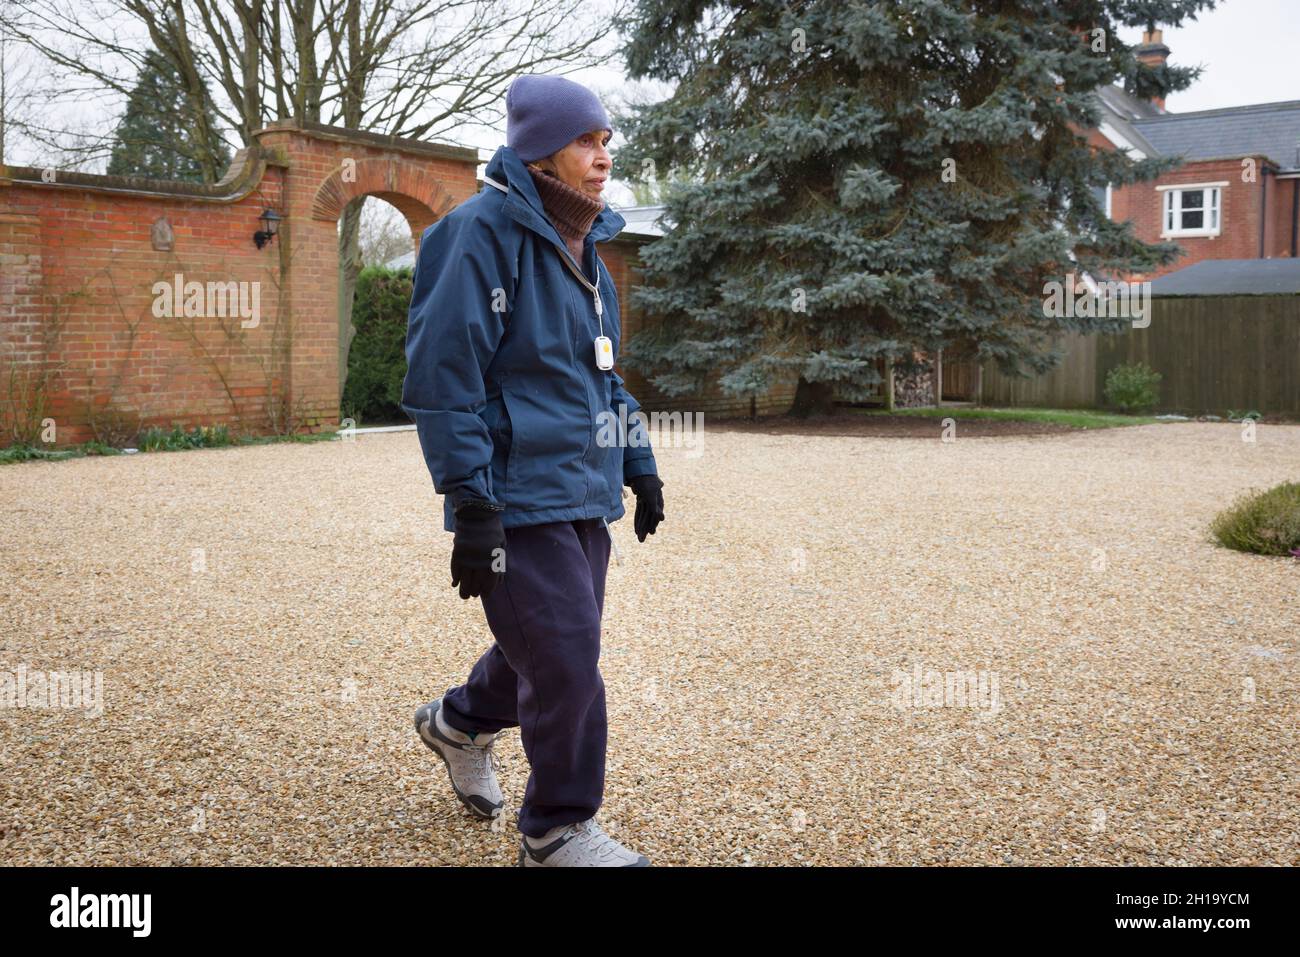 Elderly British Asian woman walking outdoors in winter. May represent senior exercising or life at a UK care home or nursing home. Stock Photo